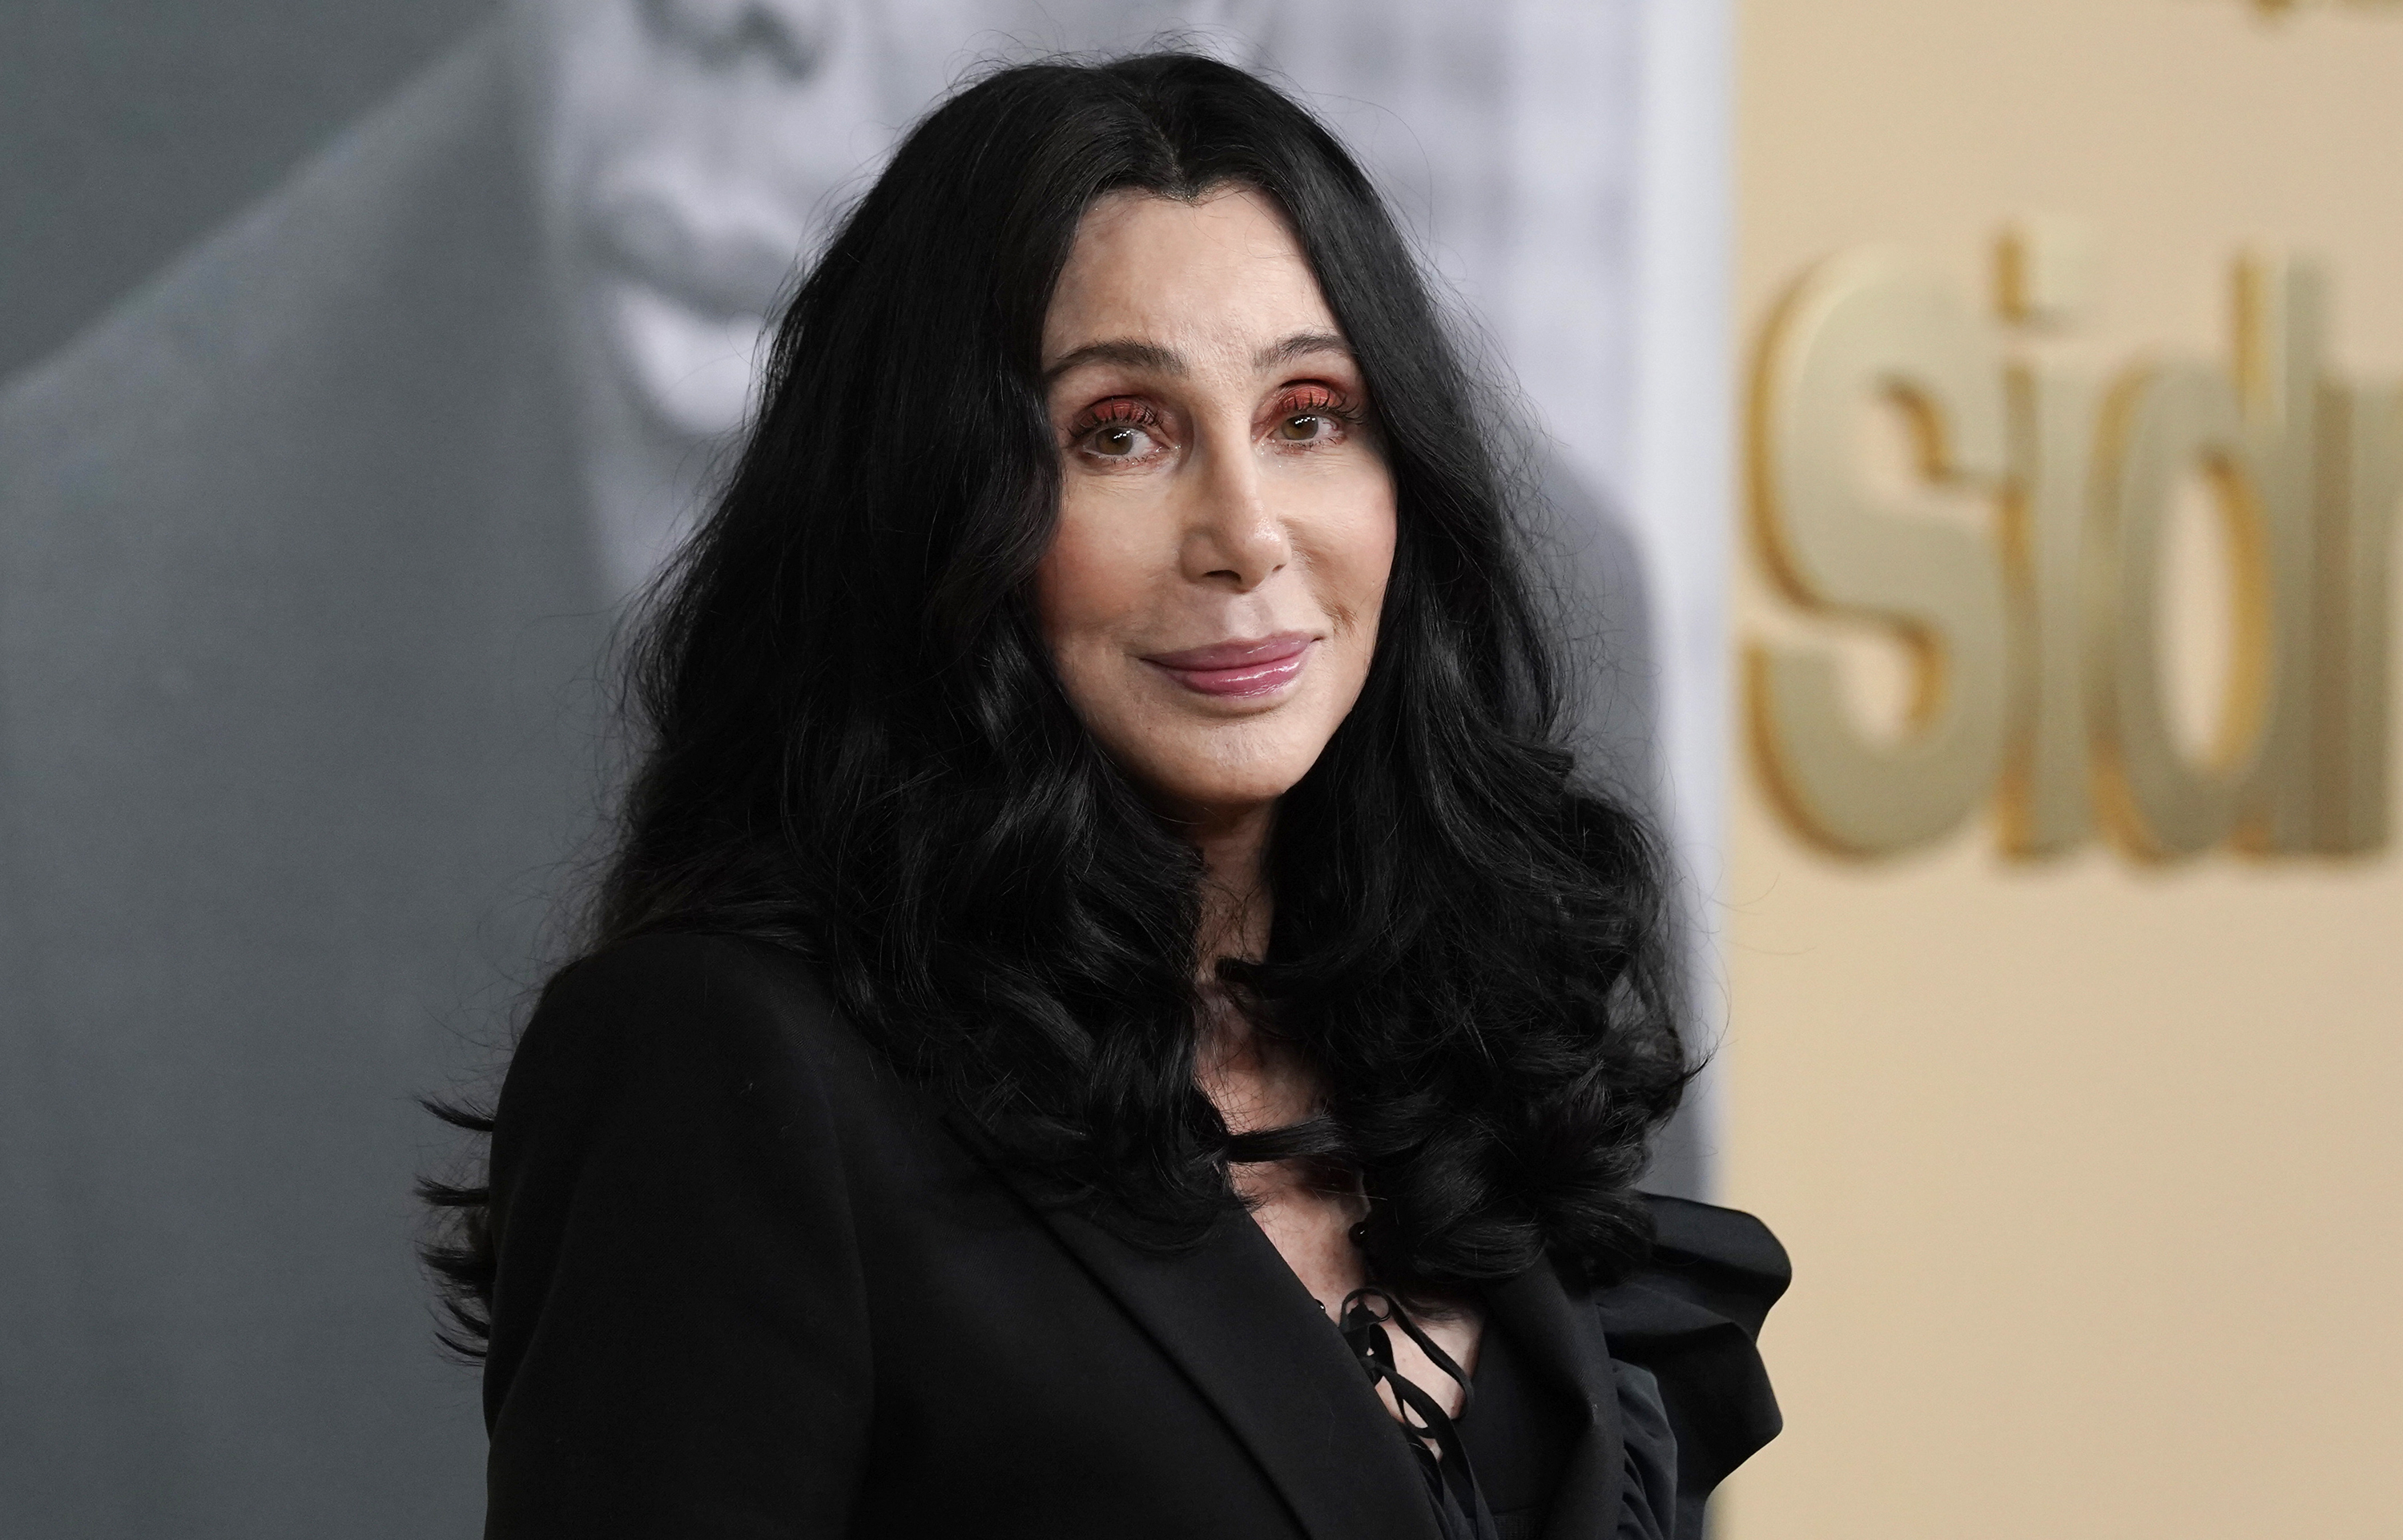 Cher has filed to be her son's conservator